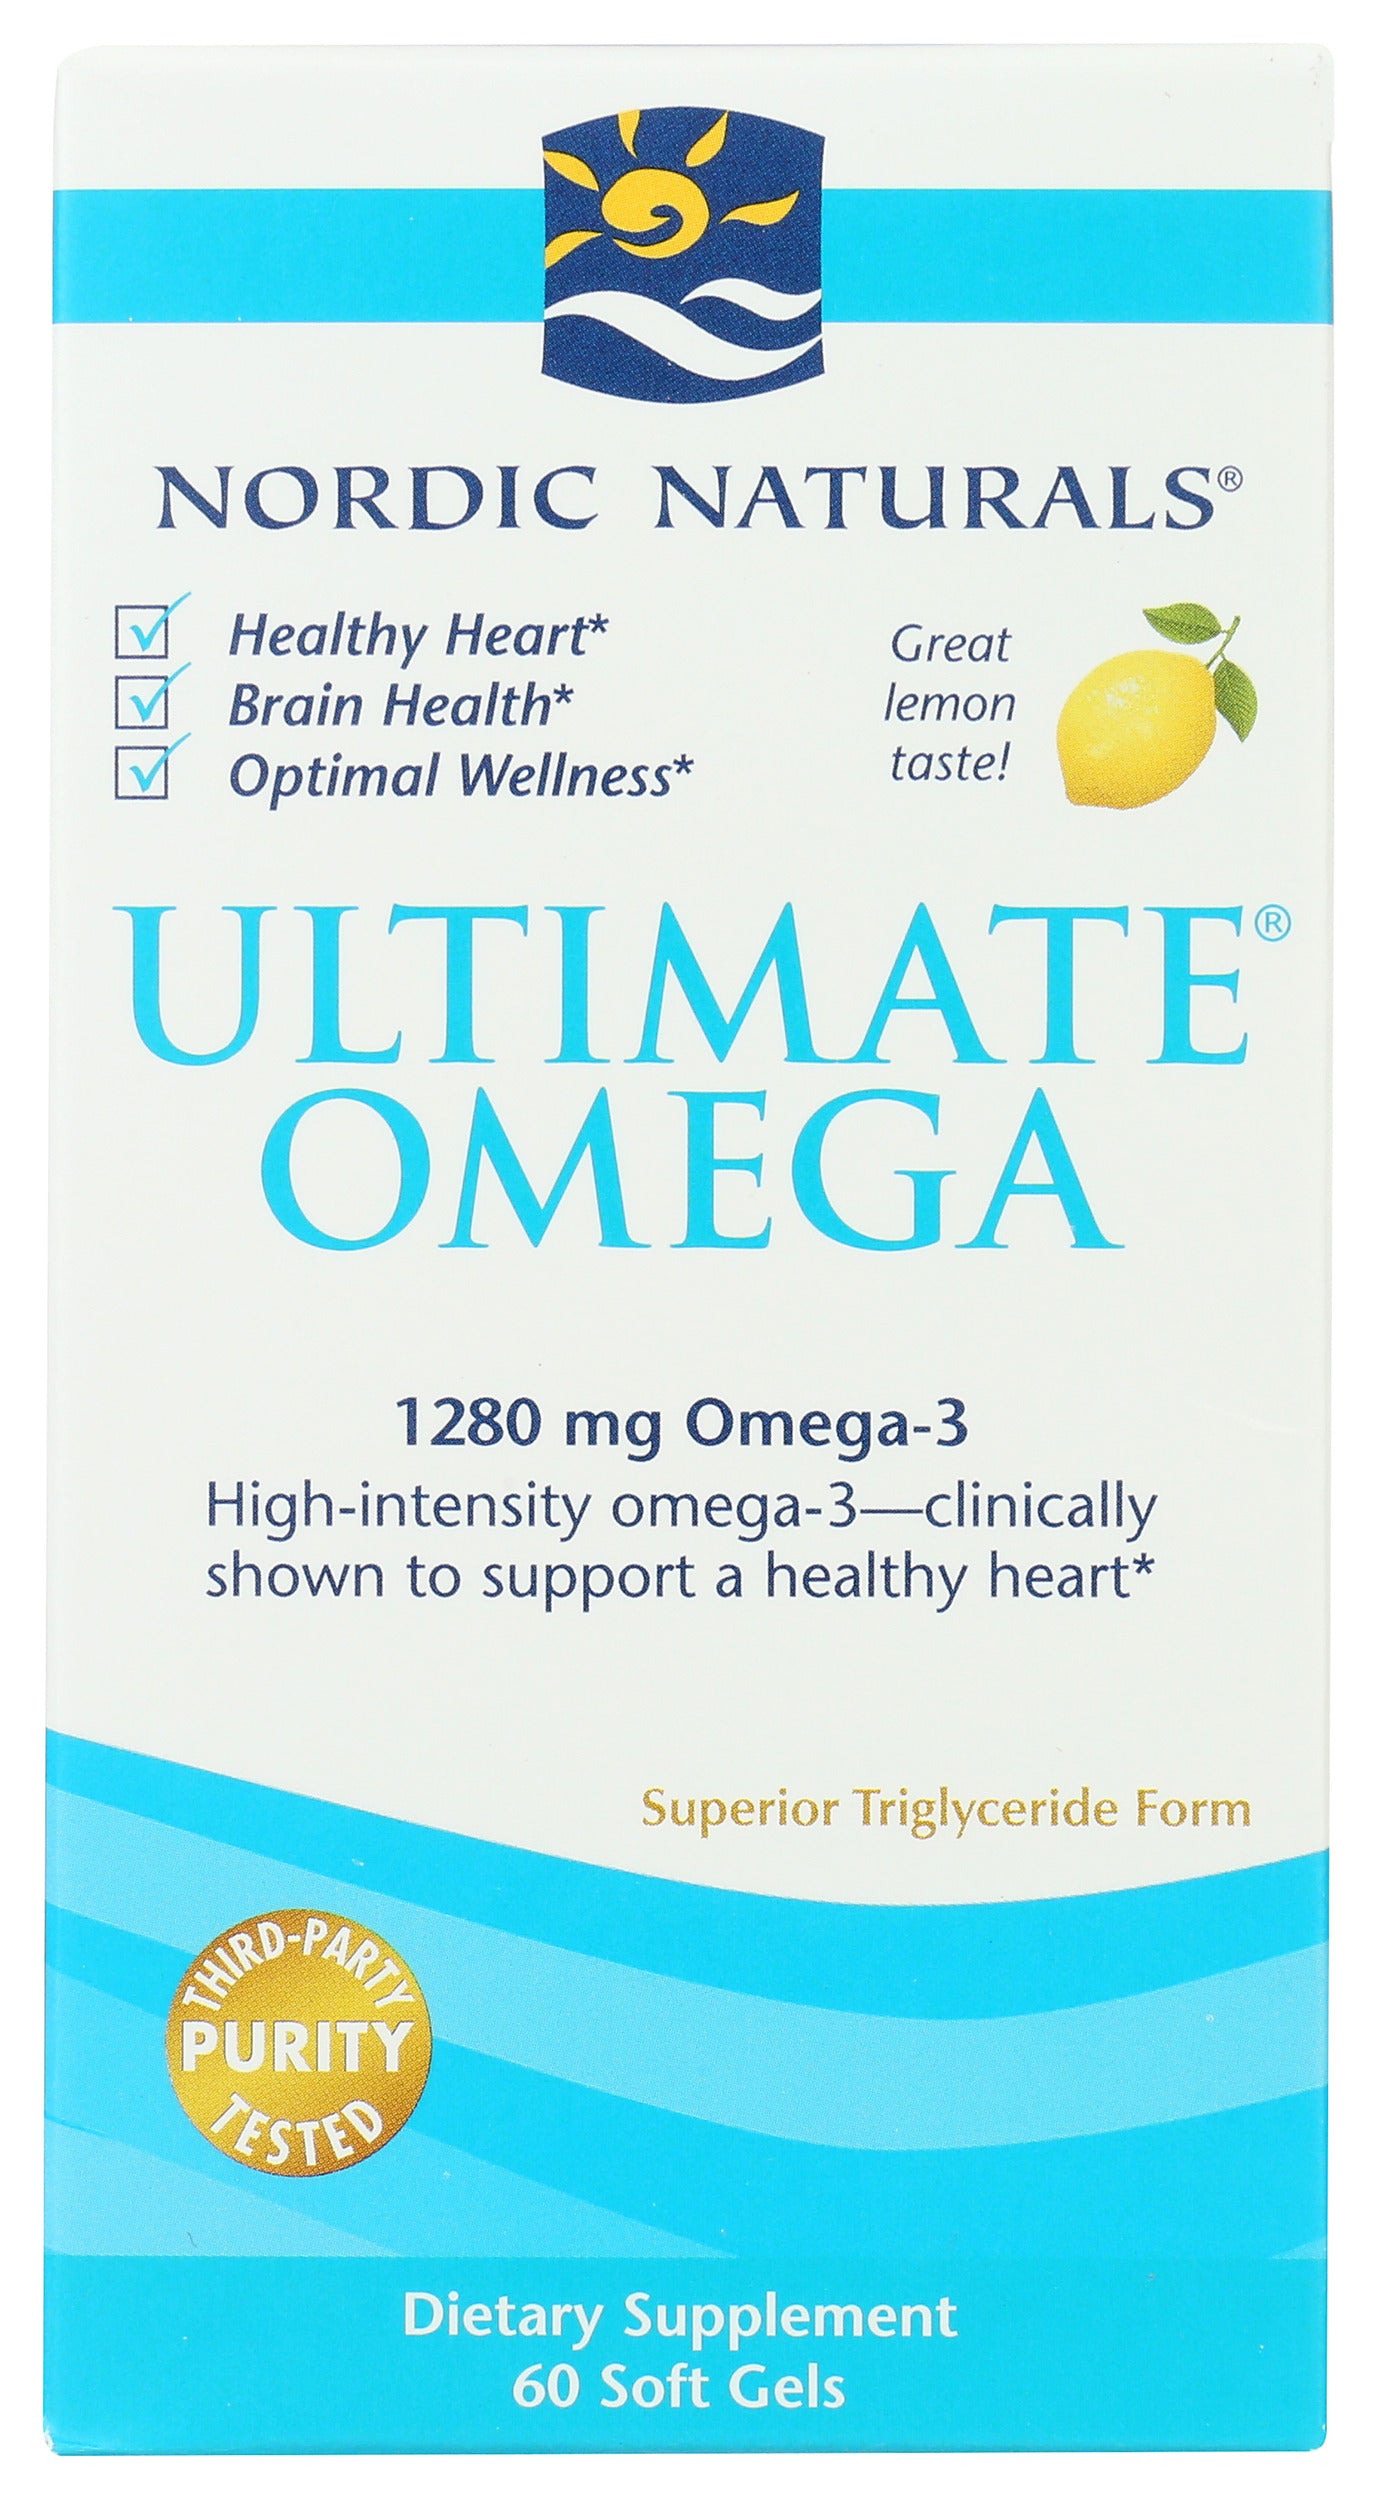 Nordic Naturals Ultimate Omega 1280mg 60 Soft Gels Front of Box